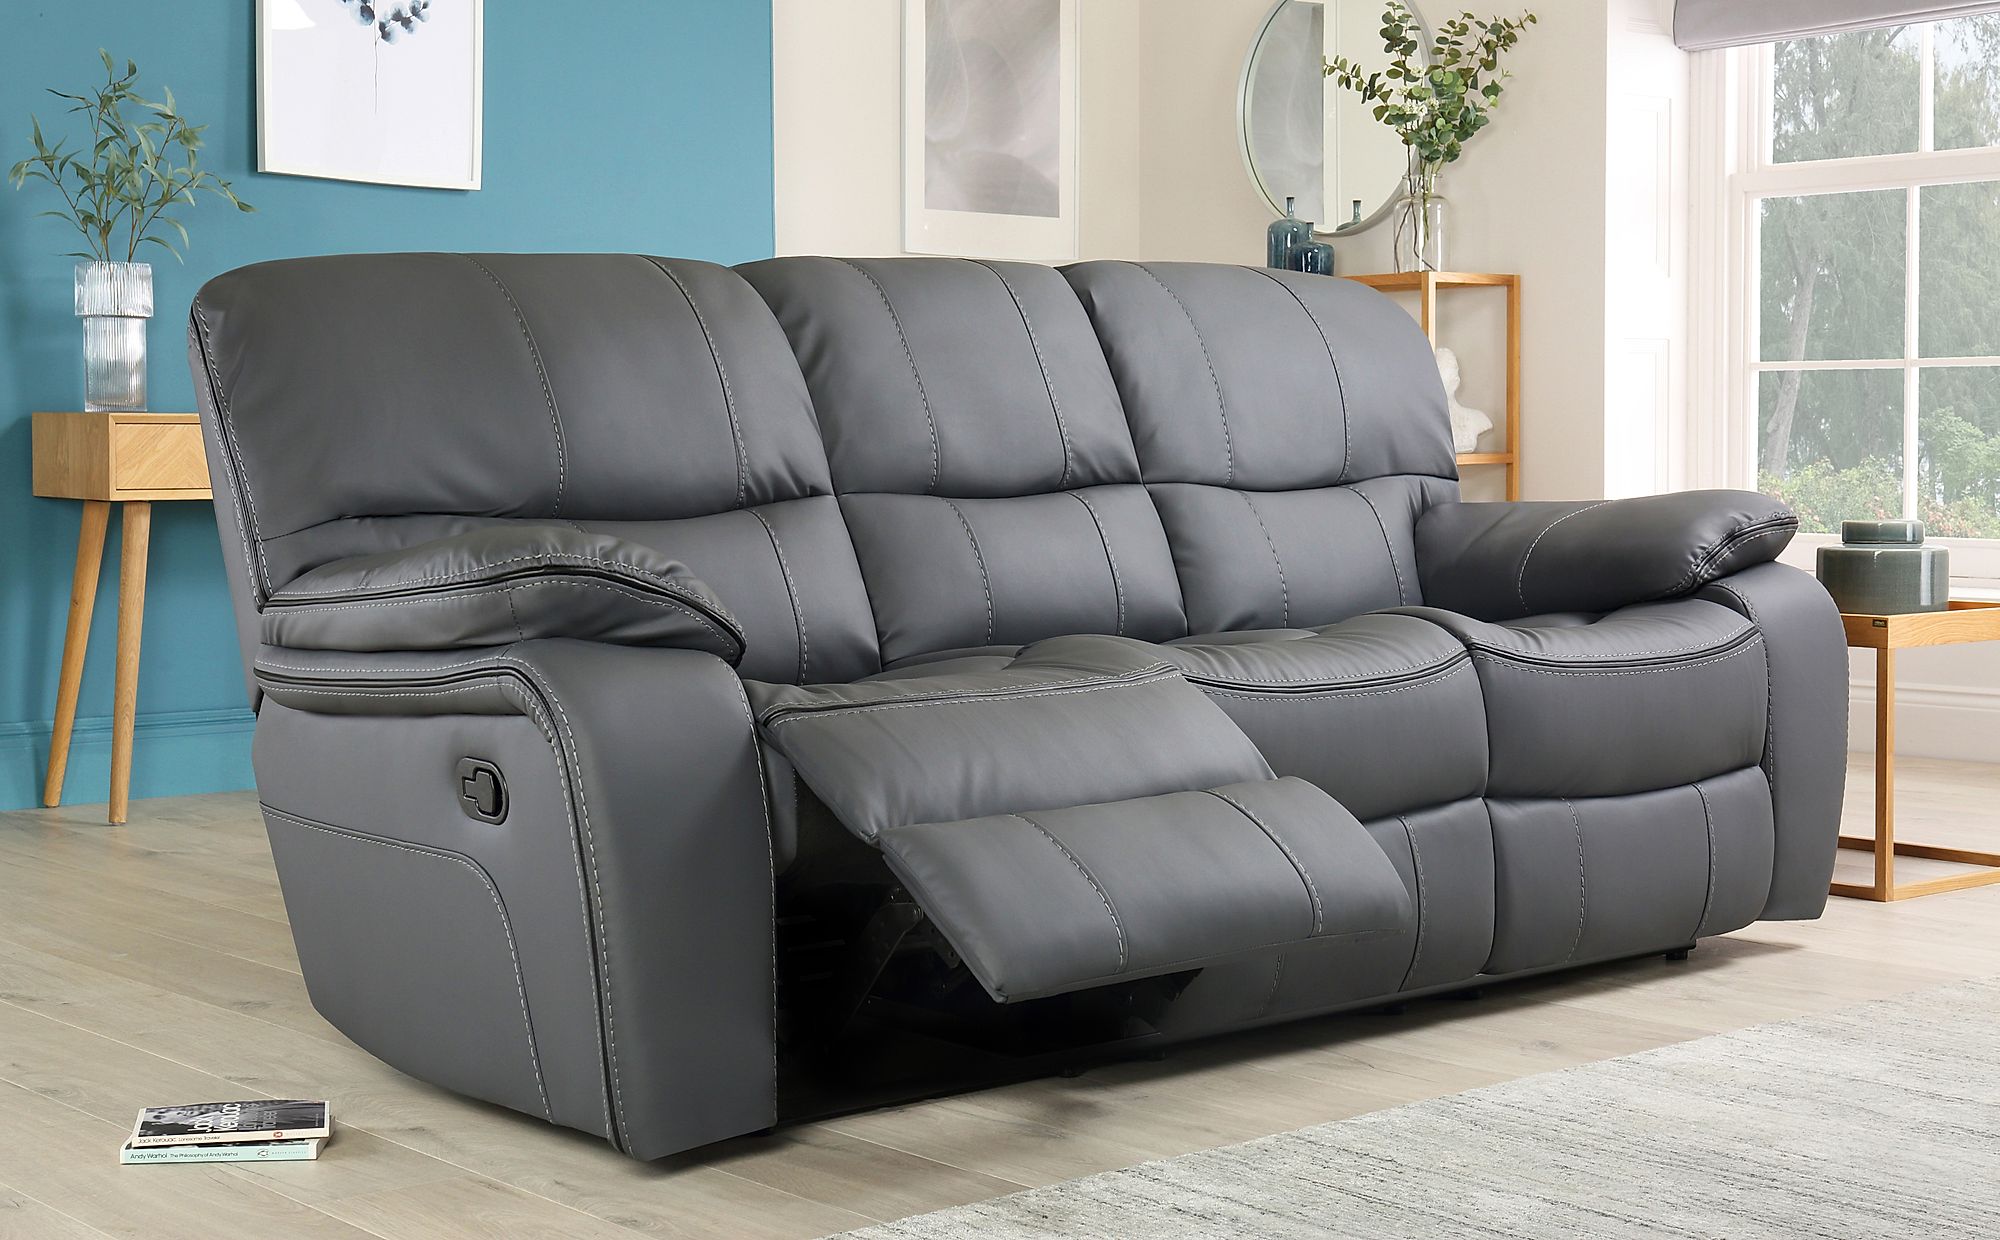 3 seater leather recliner sofa uk